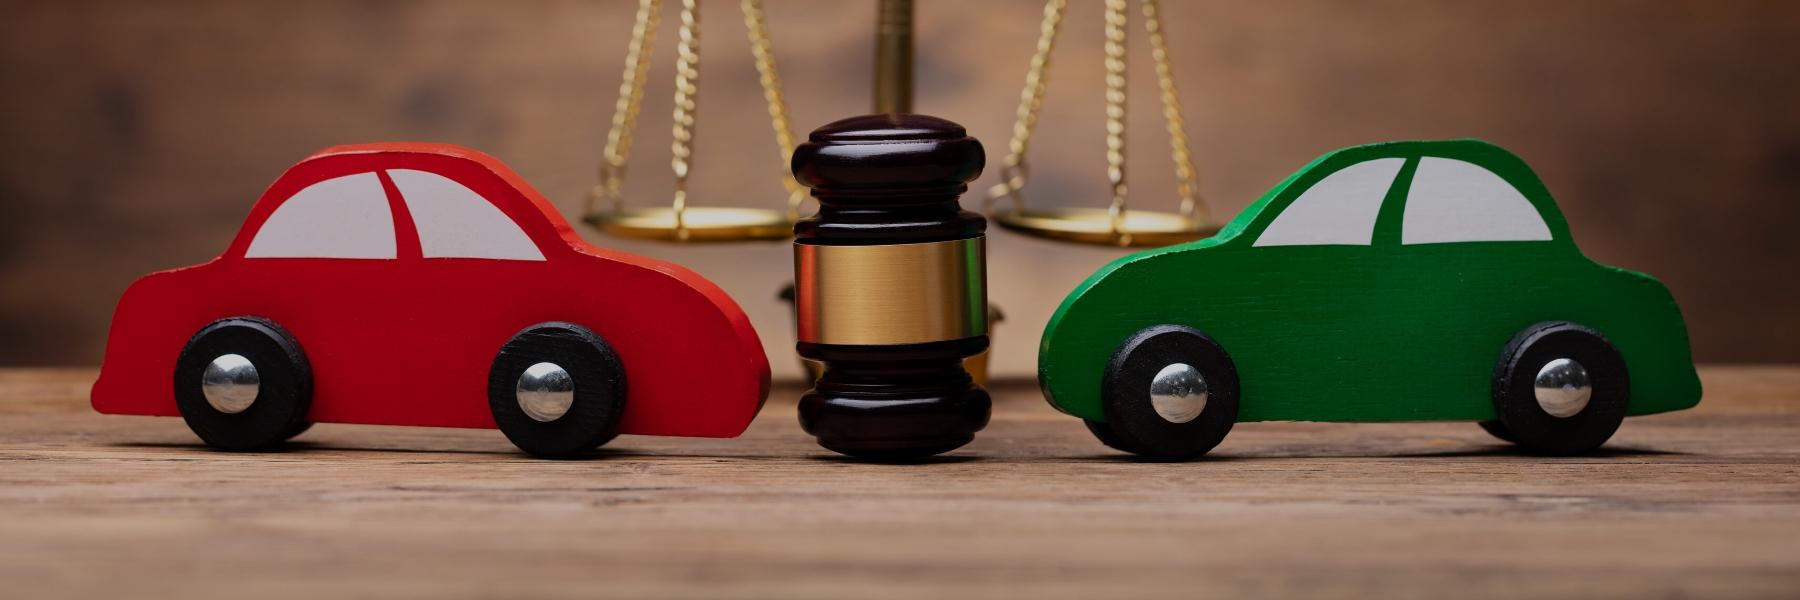 Which car Insurance is Mandatory in Ontario illustrated by two toy cars pointing toward a judge's gavel between them with scales in the background.